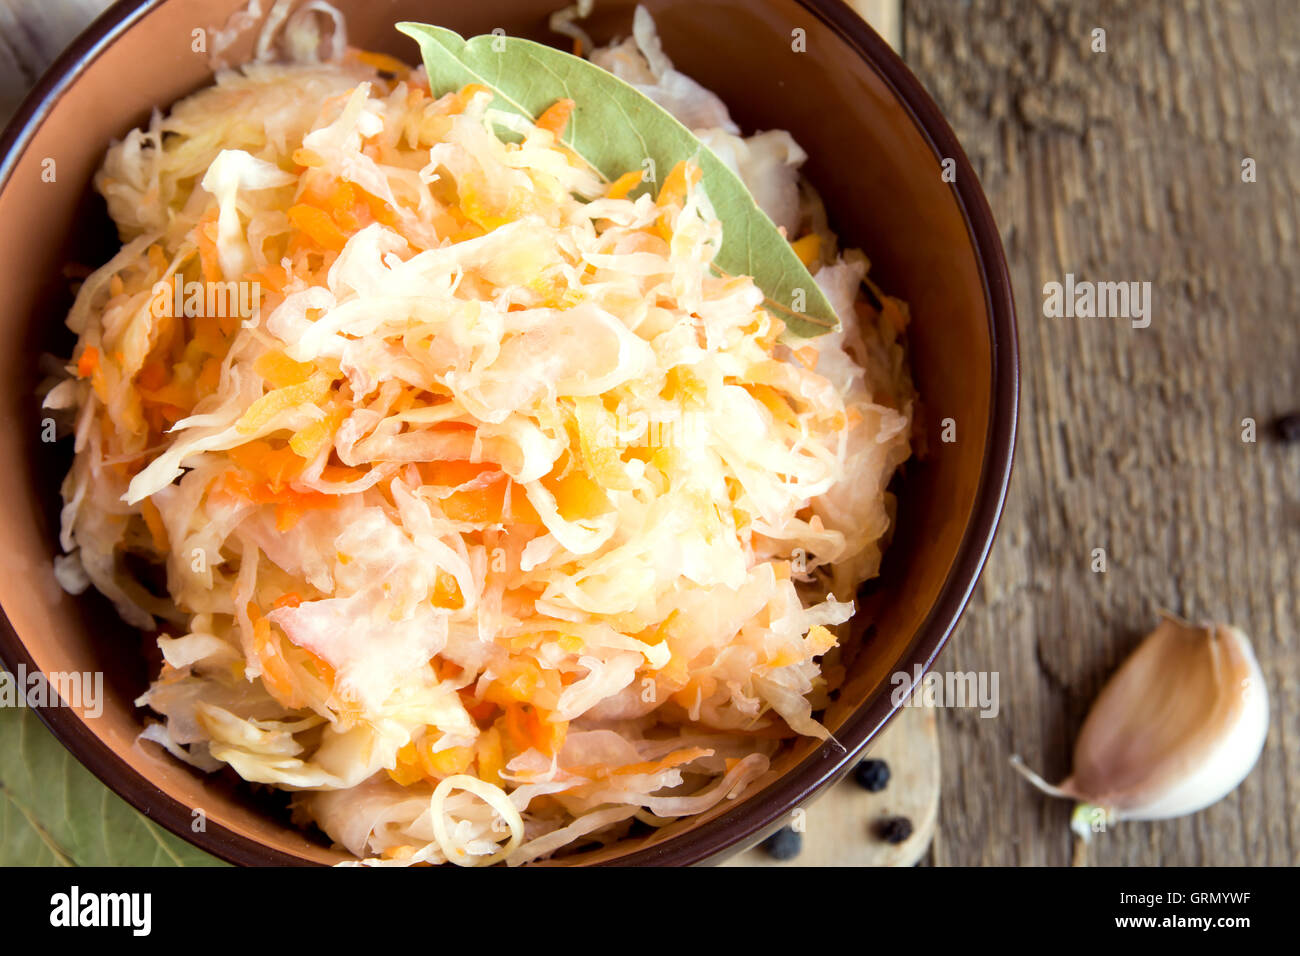 Sauerkraut in ceramic bowl on rustic wooden table with spices, traditional rustic winter food Stock Photo